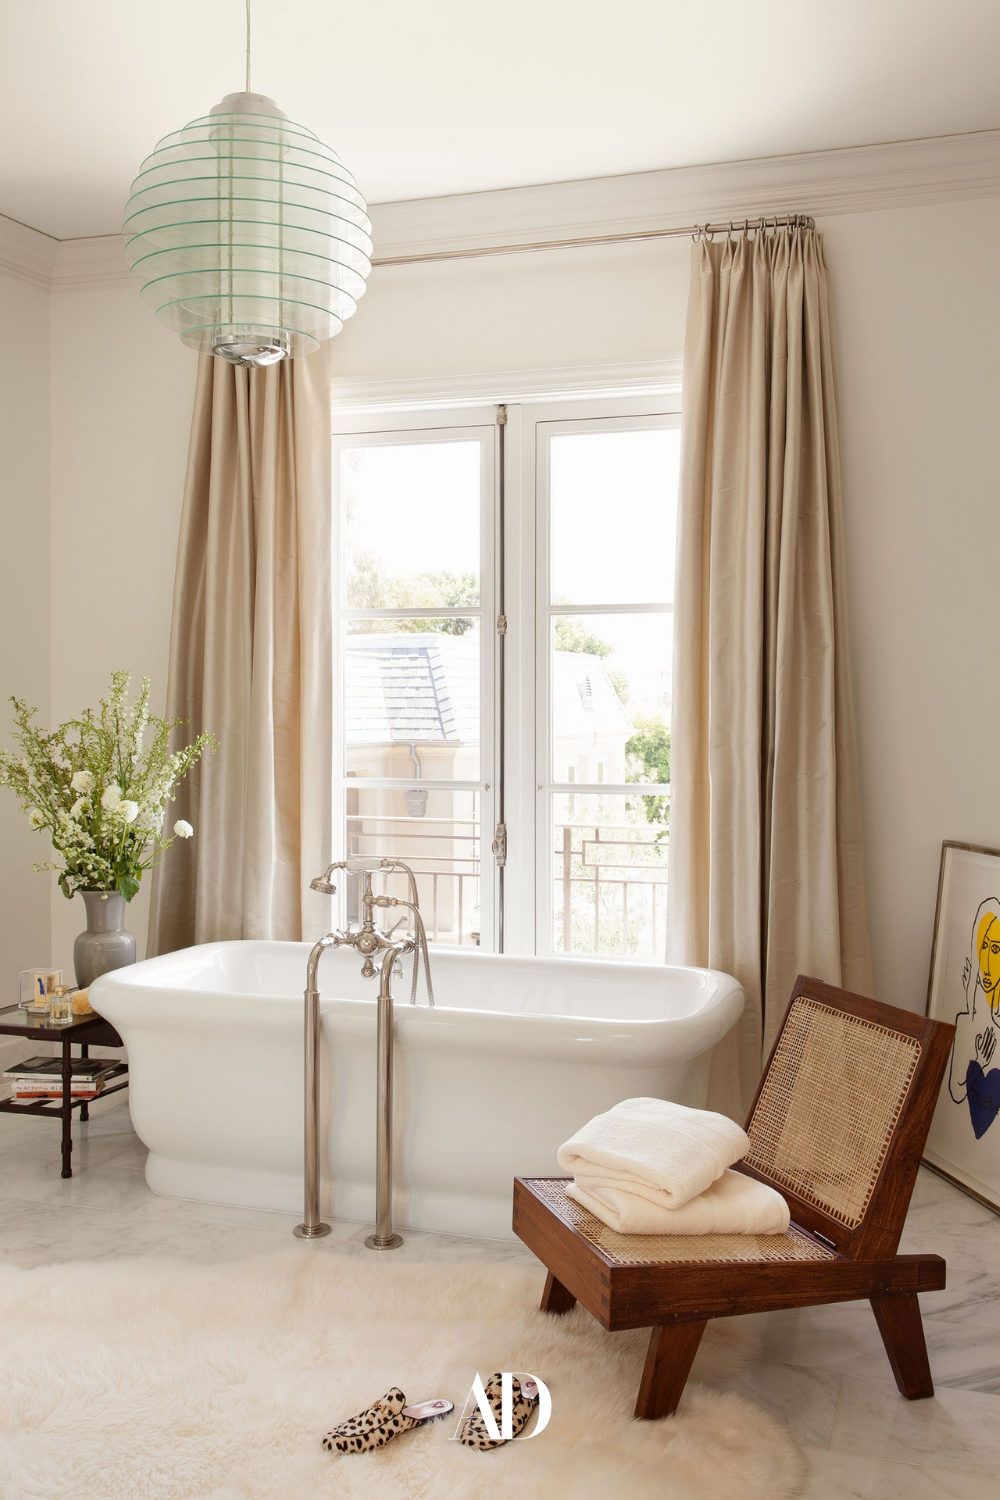 Adding Comfort and Style with Bathroom Chairs: A Complete Guide